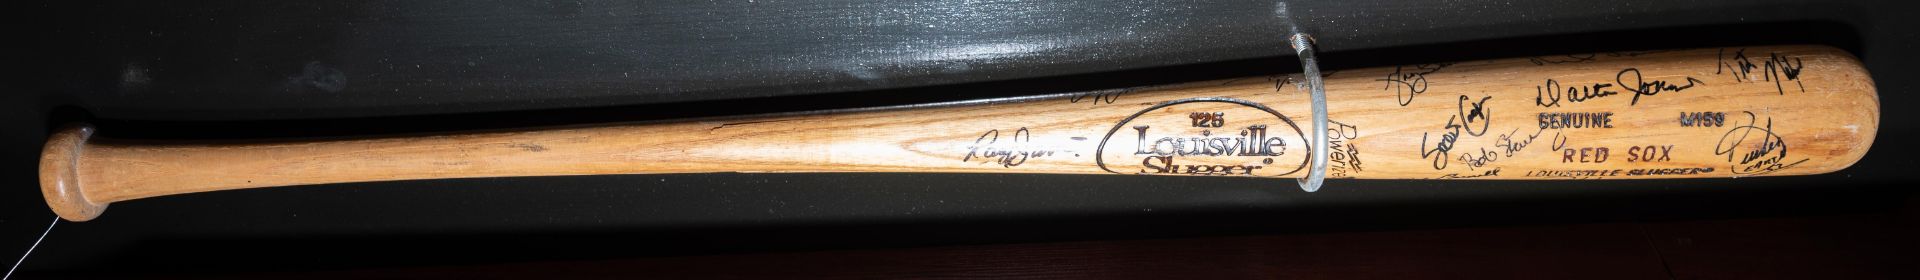 Red Sox Team Bat; Dalton Jones, and assorted , Cracked Louisville Slugger with Mount